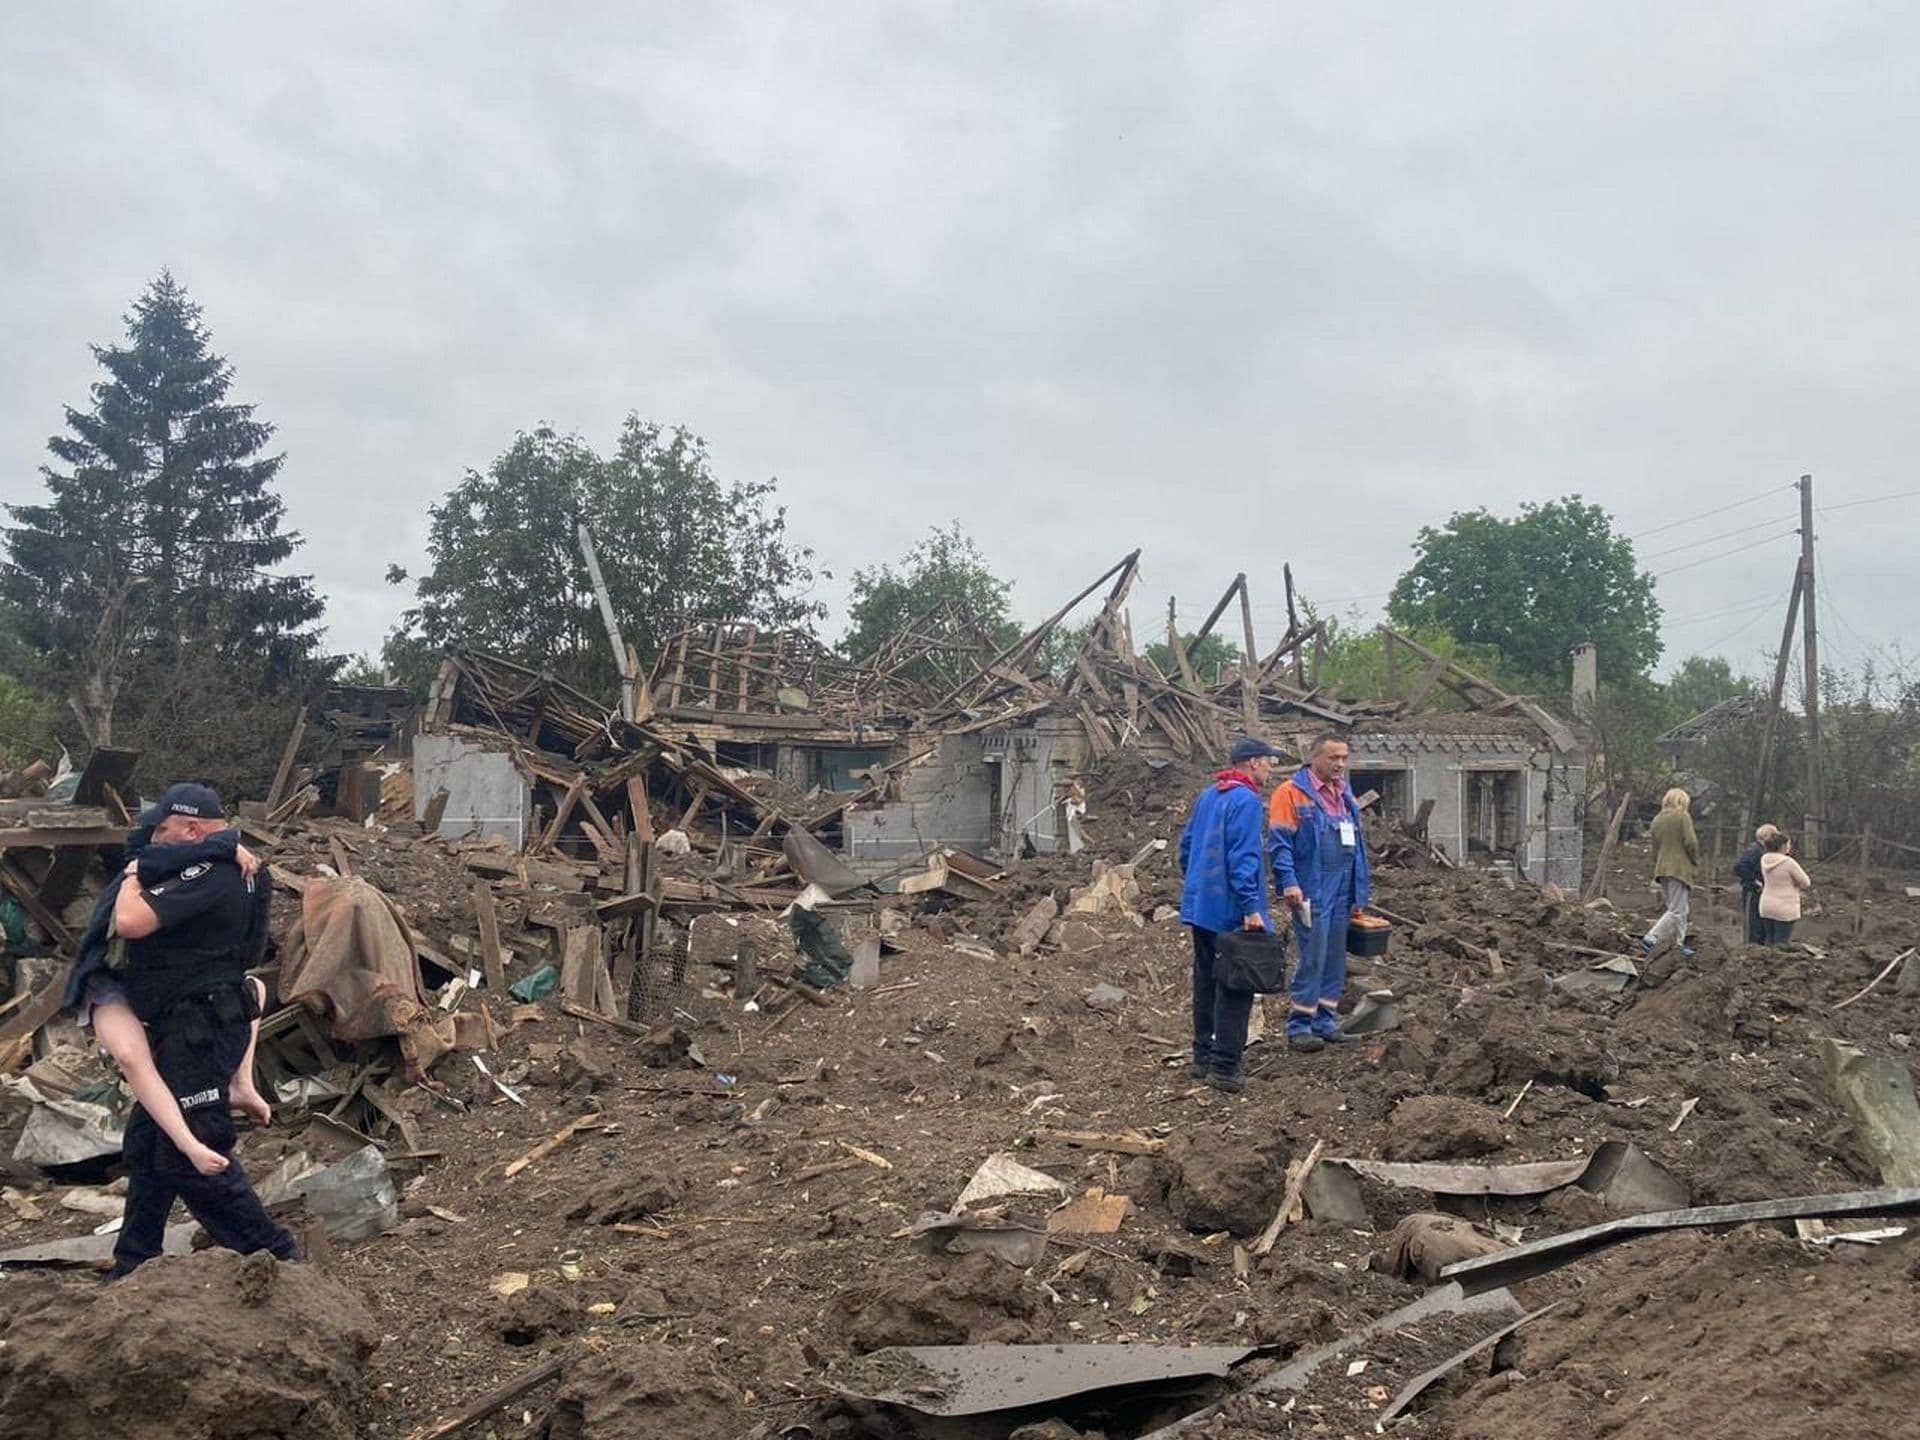 A Ukrainian police officer carries a wounded victim of the deadly morning Russian rocket attack amid debris of the ruined private houses in Kramatorsk